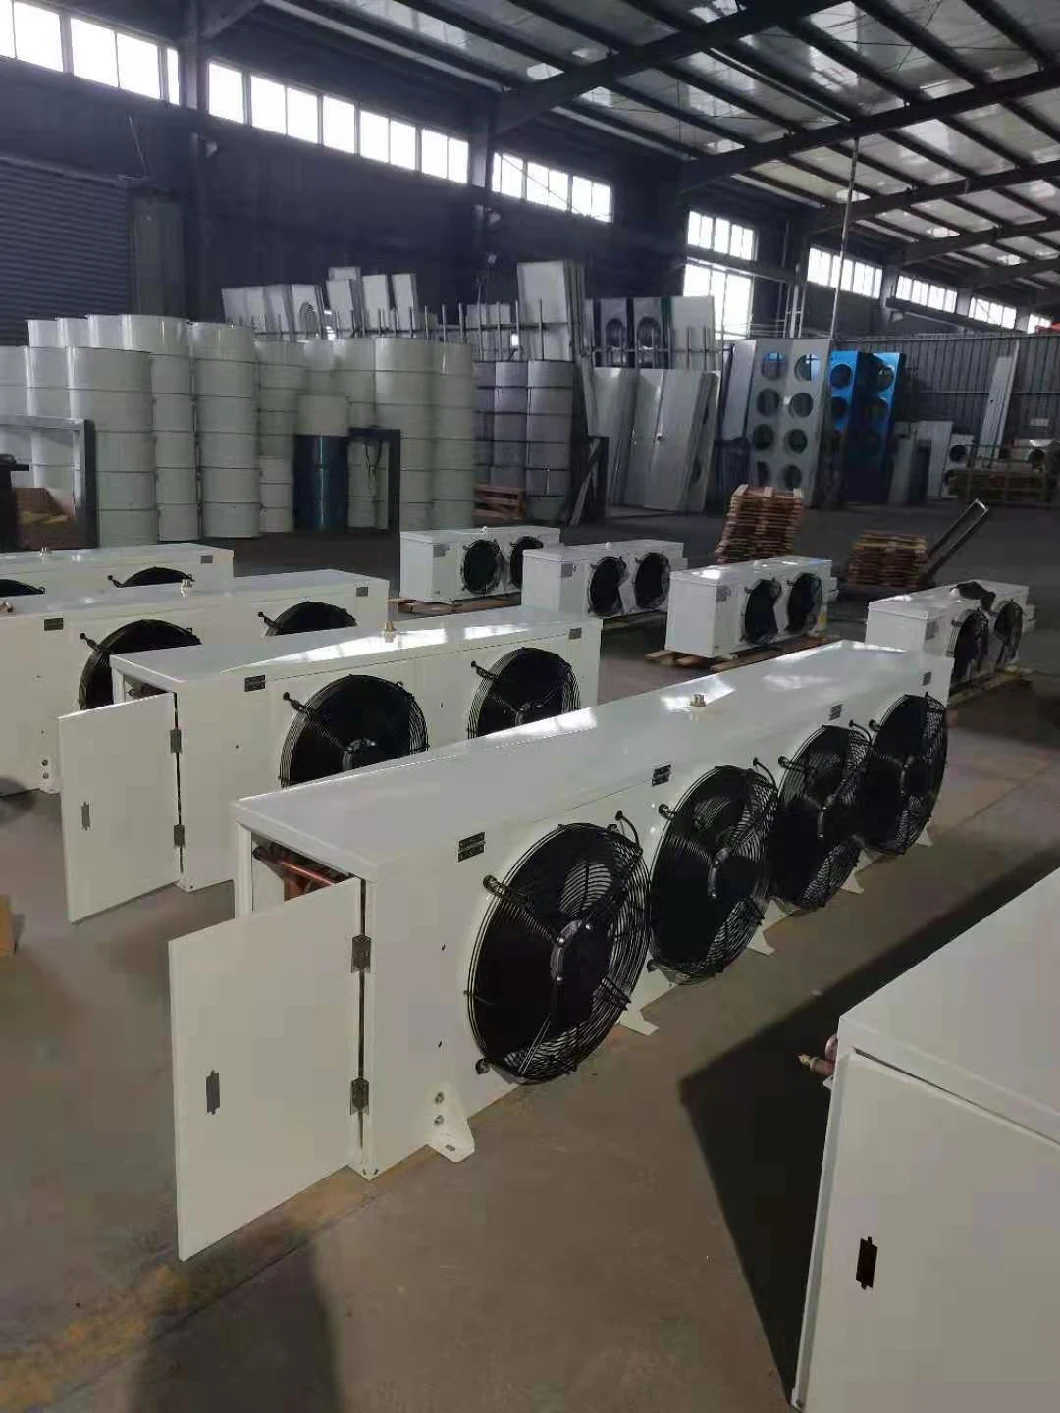 Factory Supplier Air Cooded Evaporators, Air Cooler for Refrigerator, Condenser